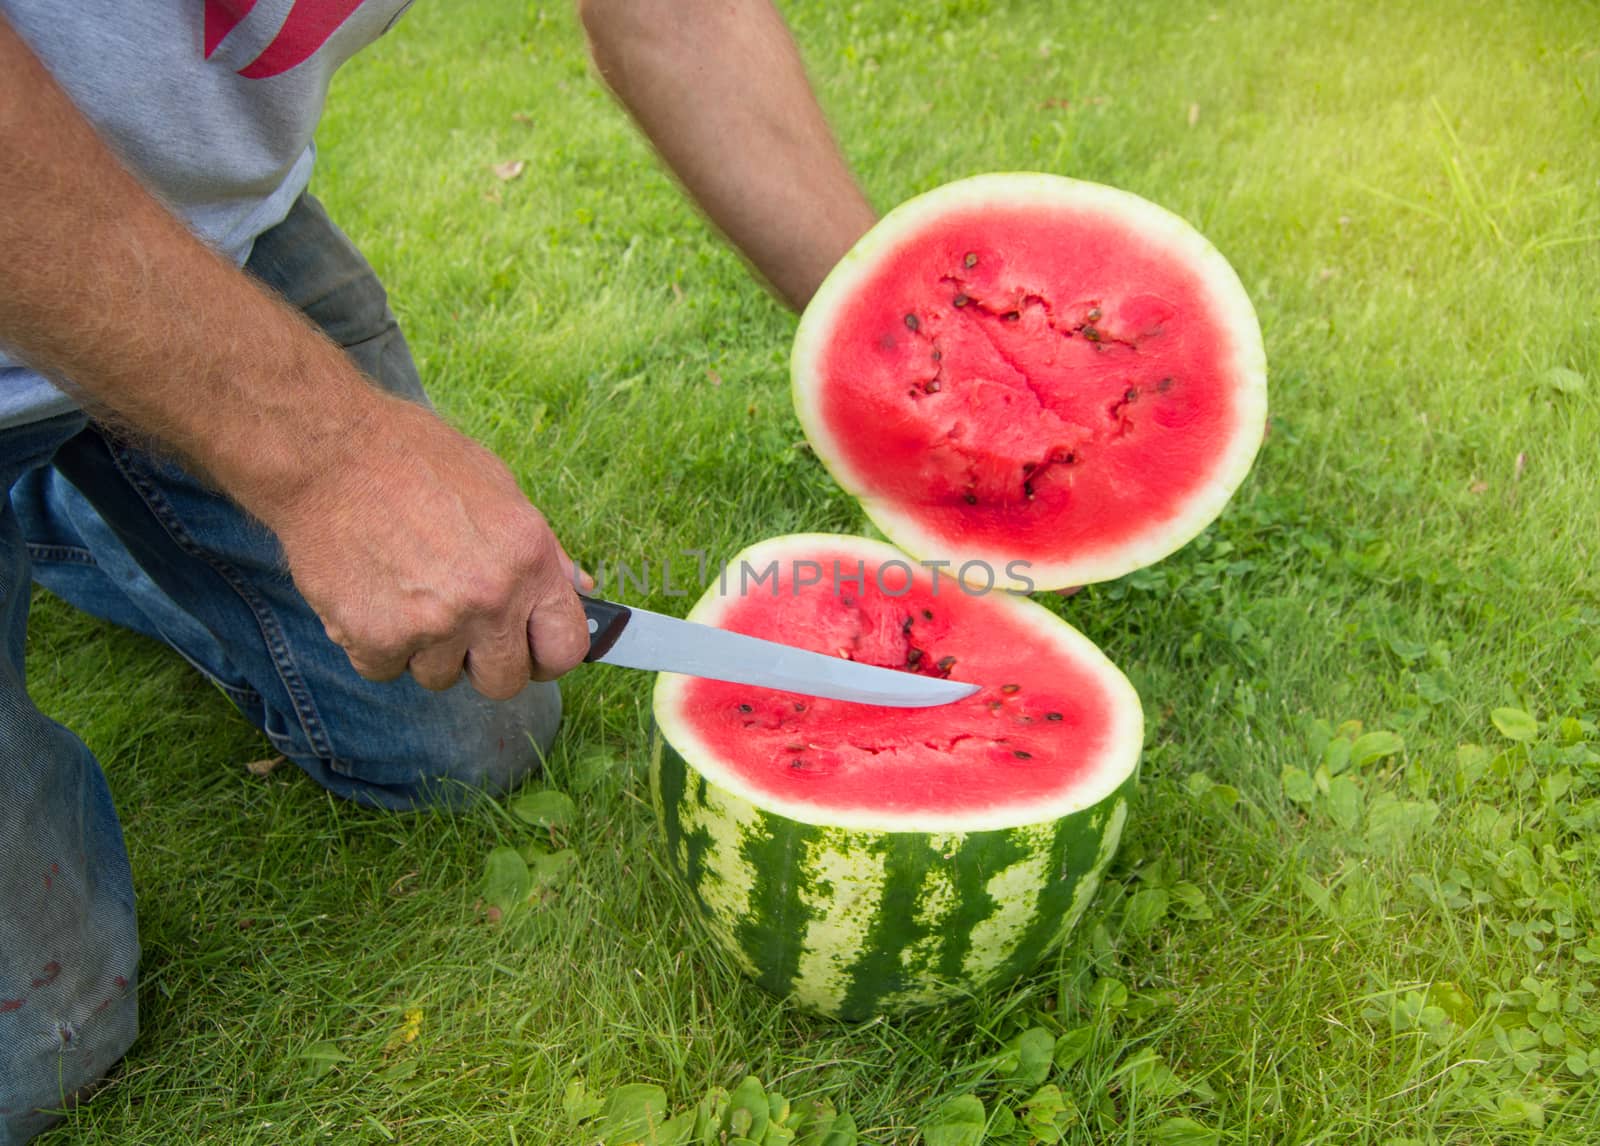 Man in jeans kneels on the grass, cutting with a knife a red ripe watermelon for a summer family dinner.